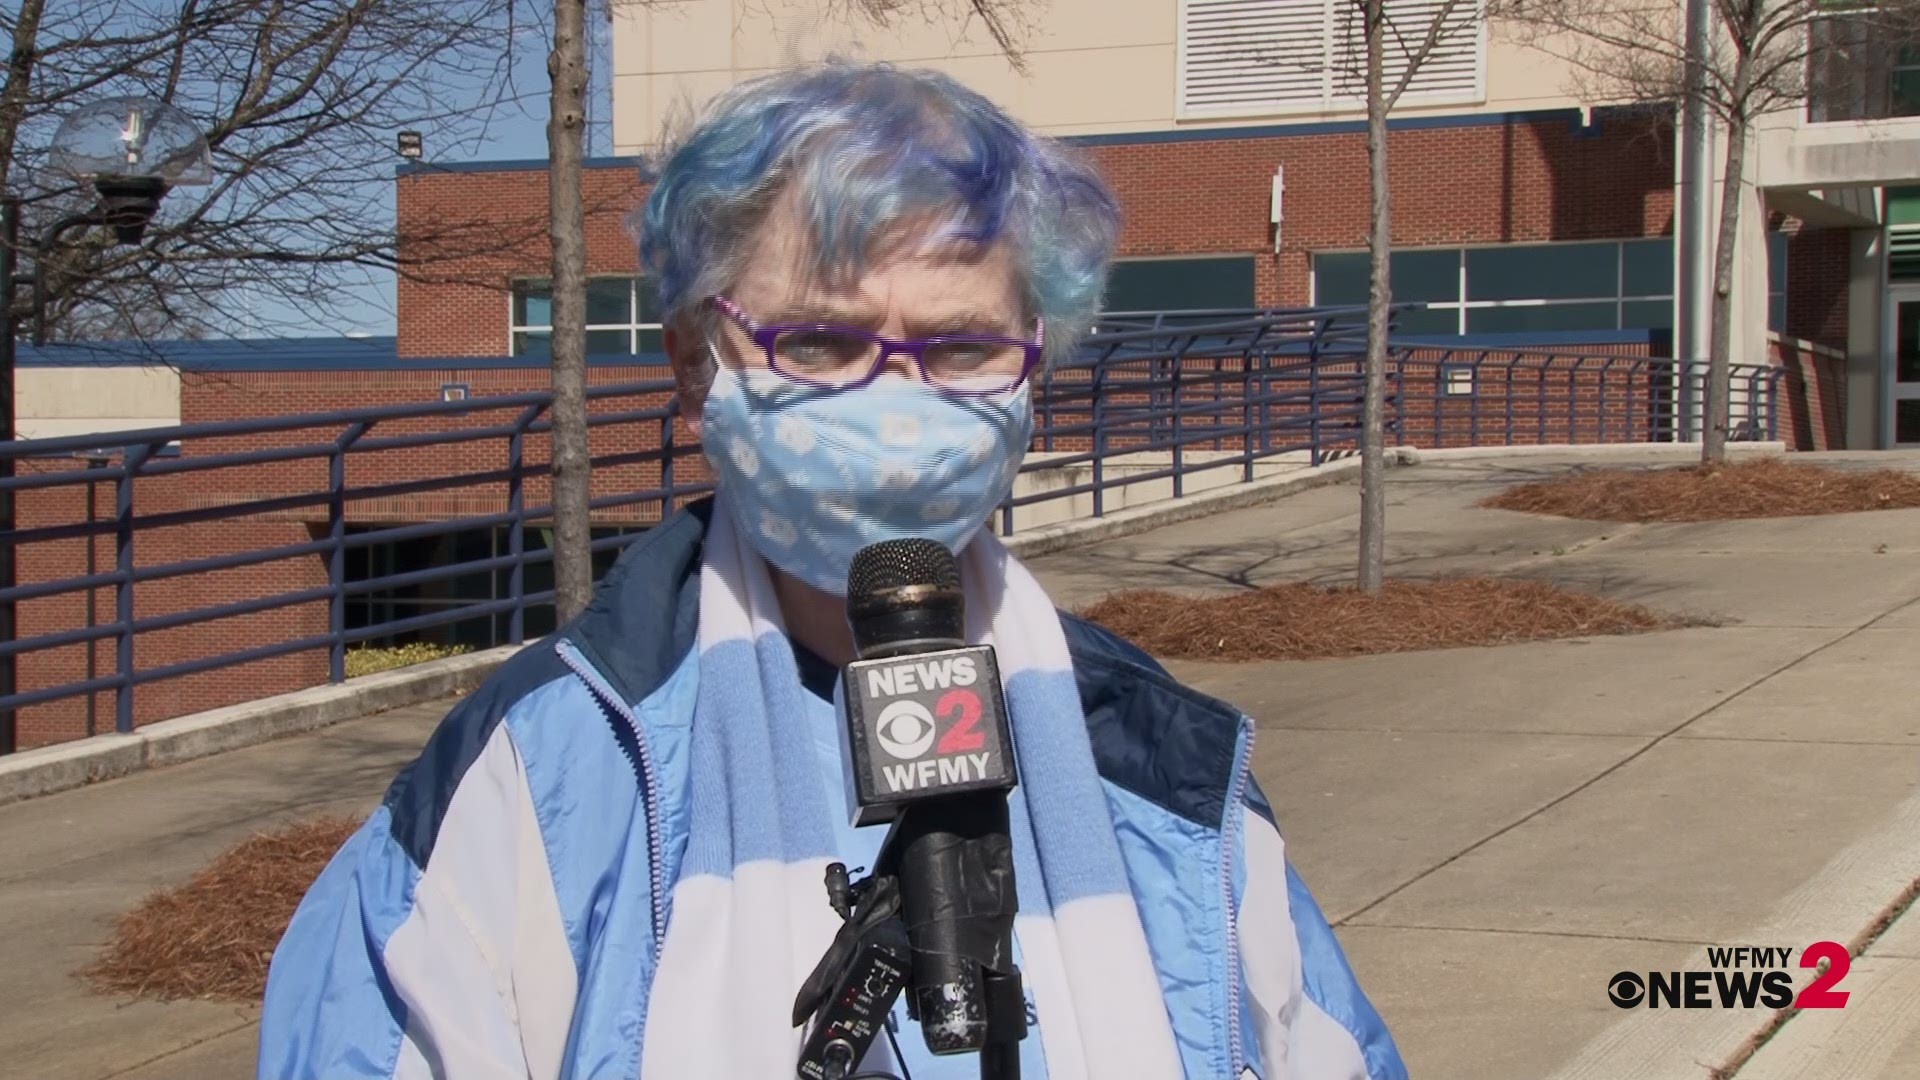 A North Carolina fan comes to first basketball game since pandemic started.